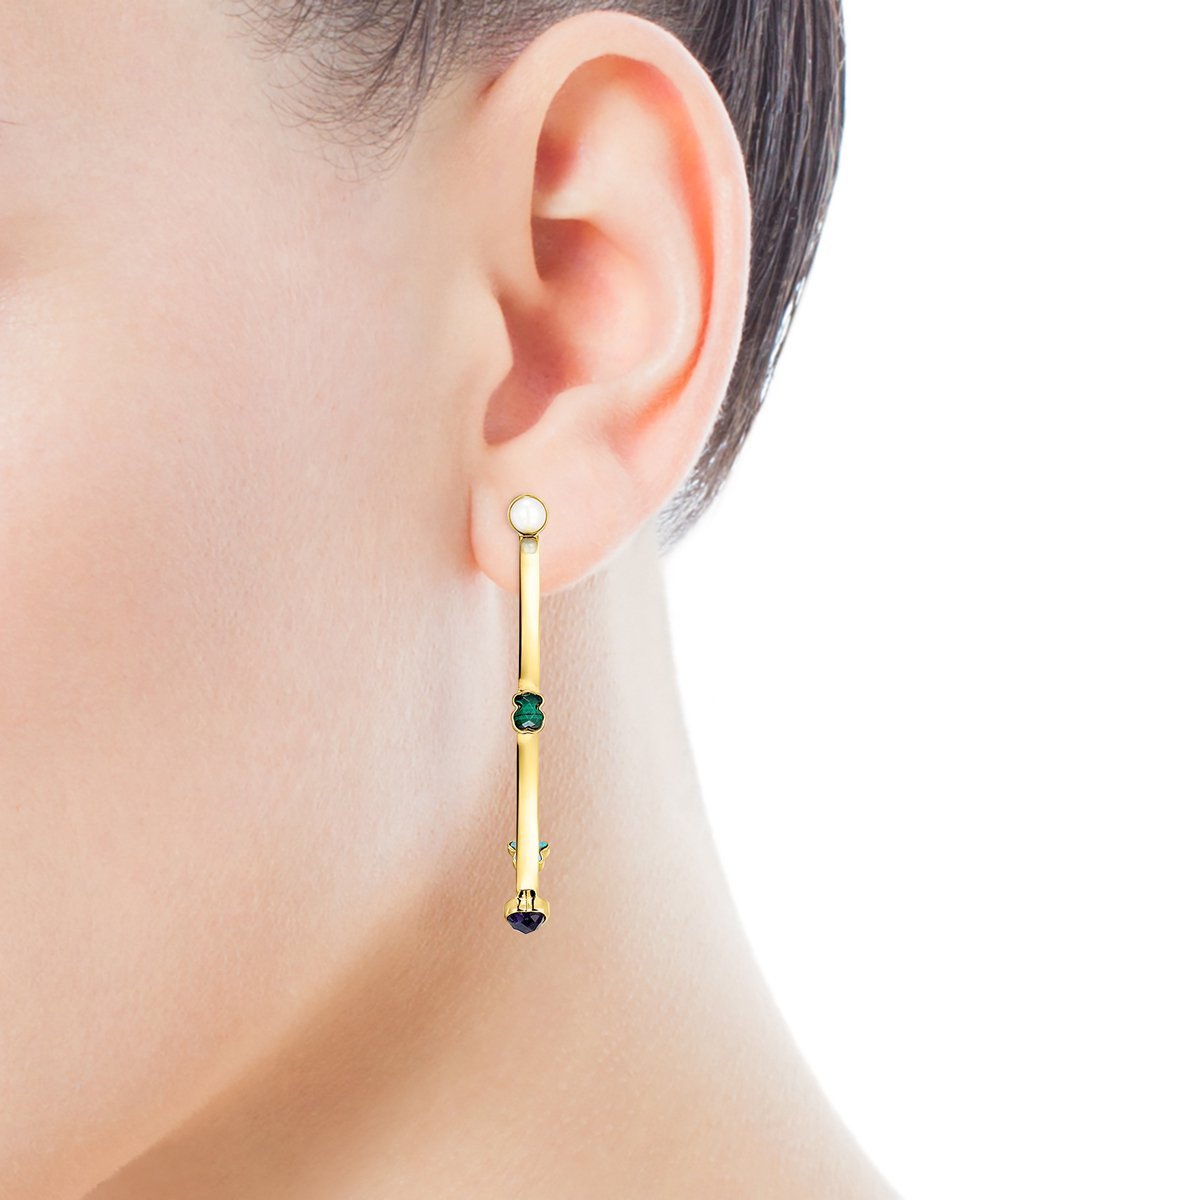 Tous Large Glory Earrings in Gold Vermeil with Gemstones 918593520